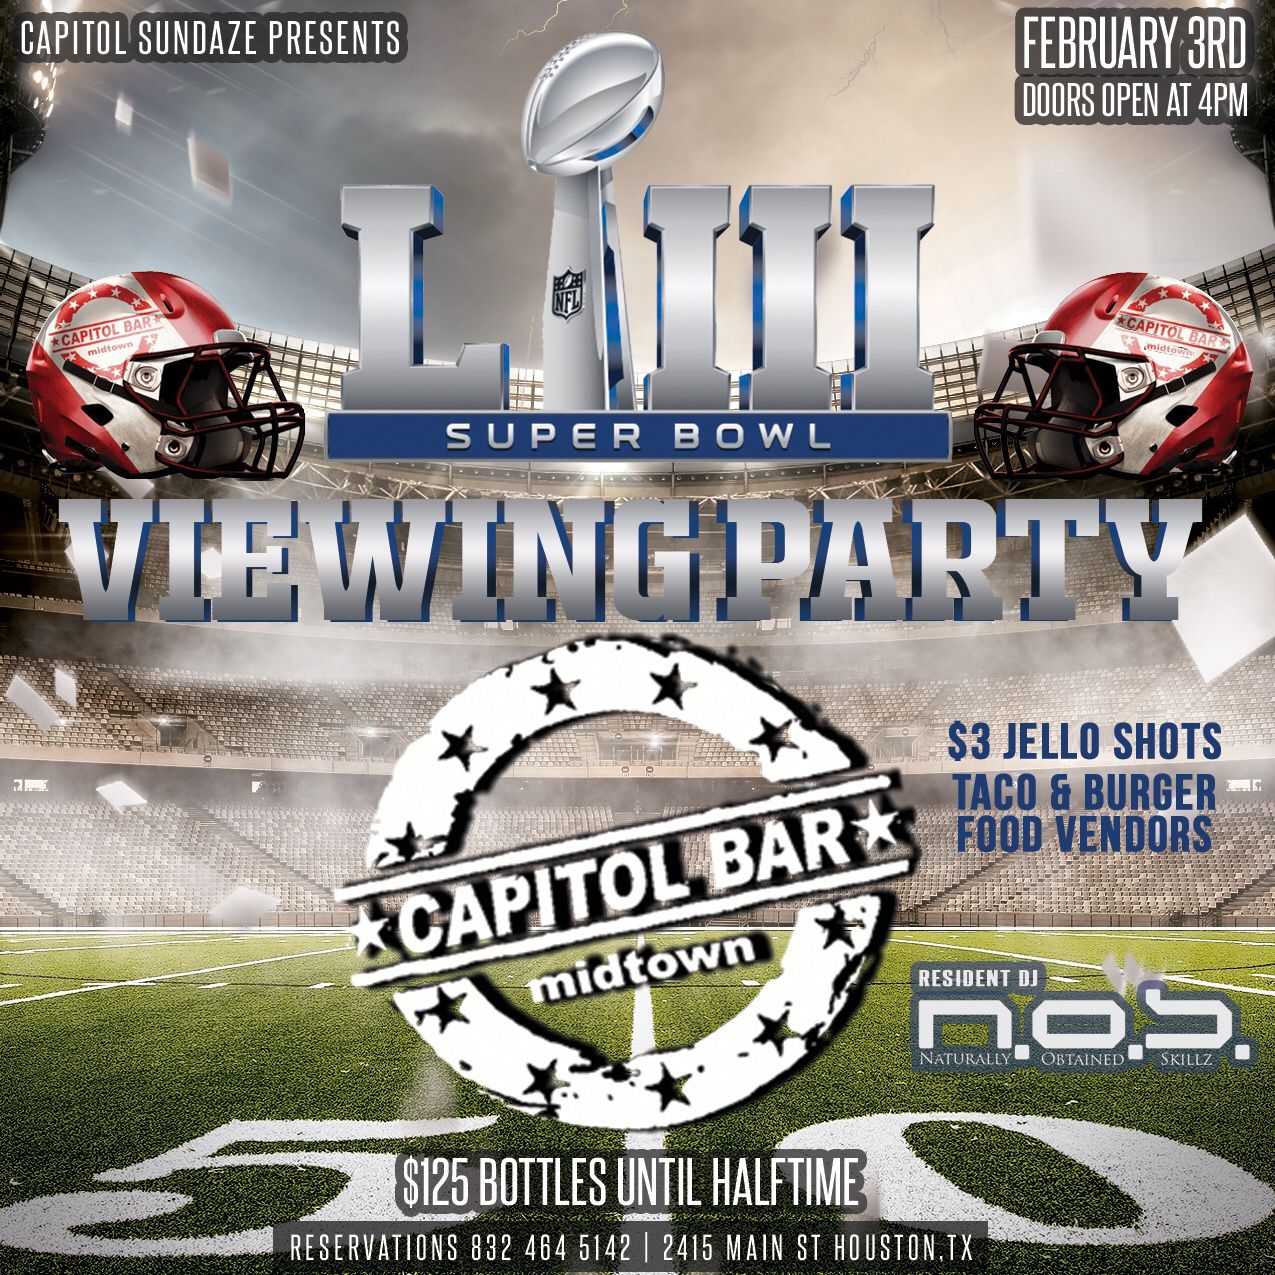 Huge Super Bowl viewing party : Free admission tickets